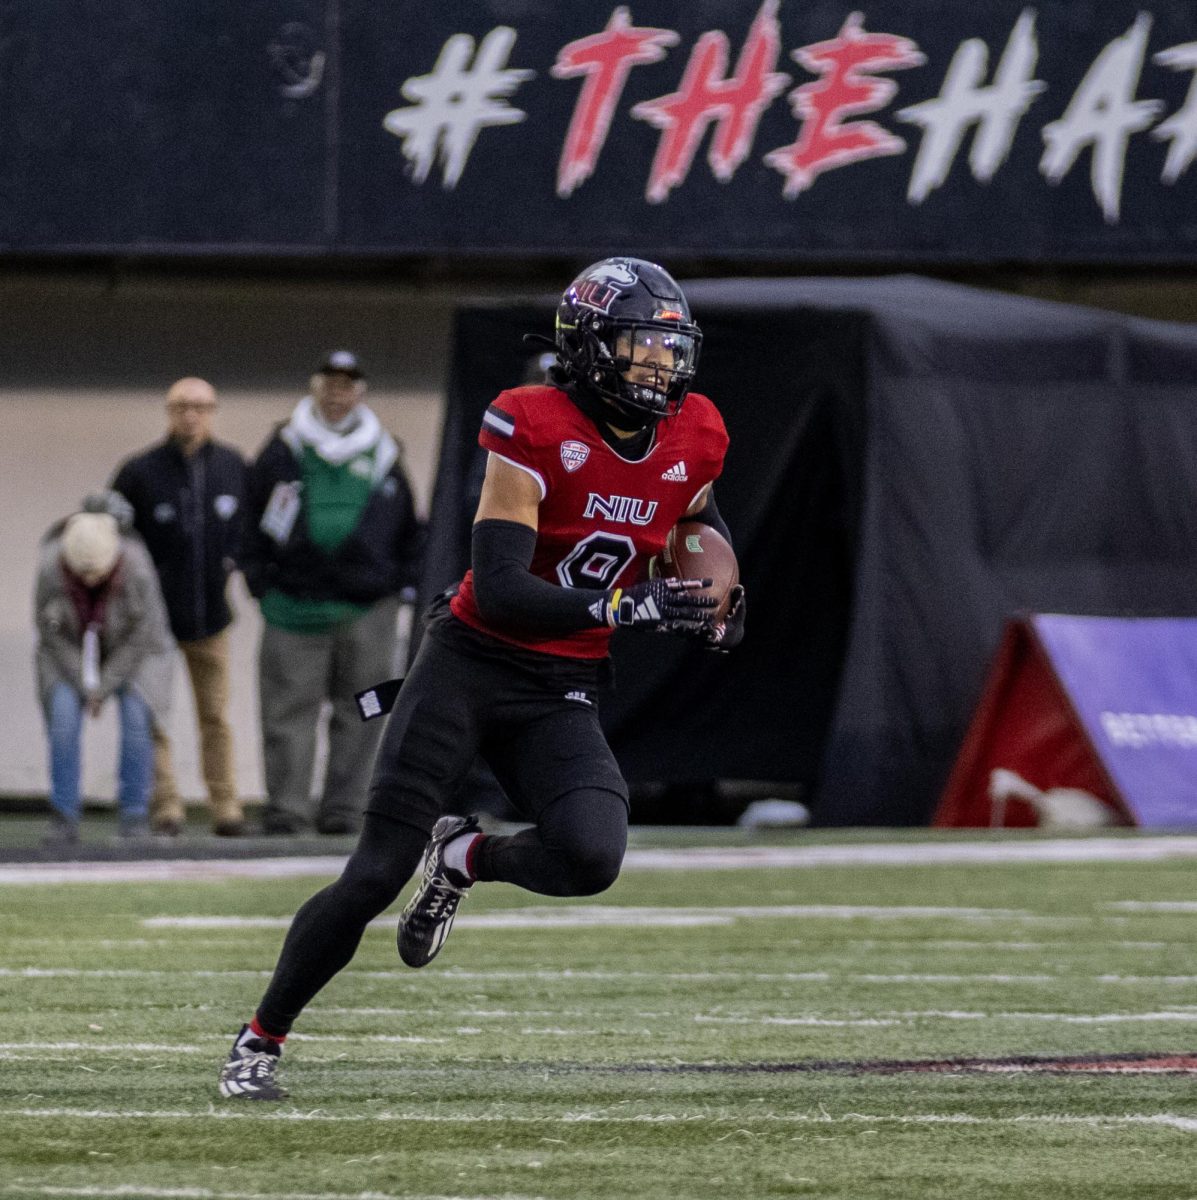 NIU junior safety Nate Valcarcel (9) runs back an interception during the fourth quarter against Ohio. The Huskies won the game 23-13. (Tim Dodge | Northern Star)